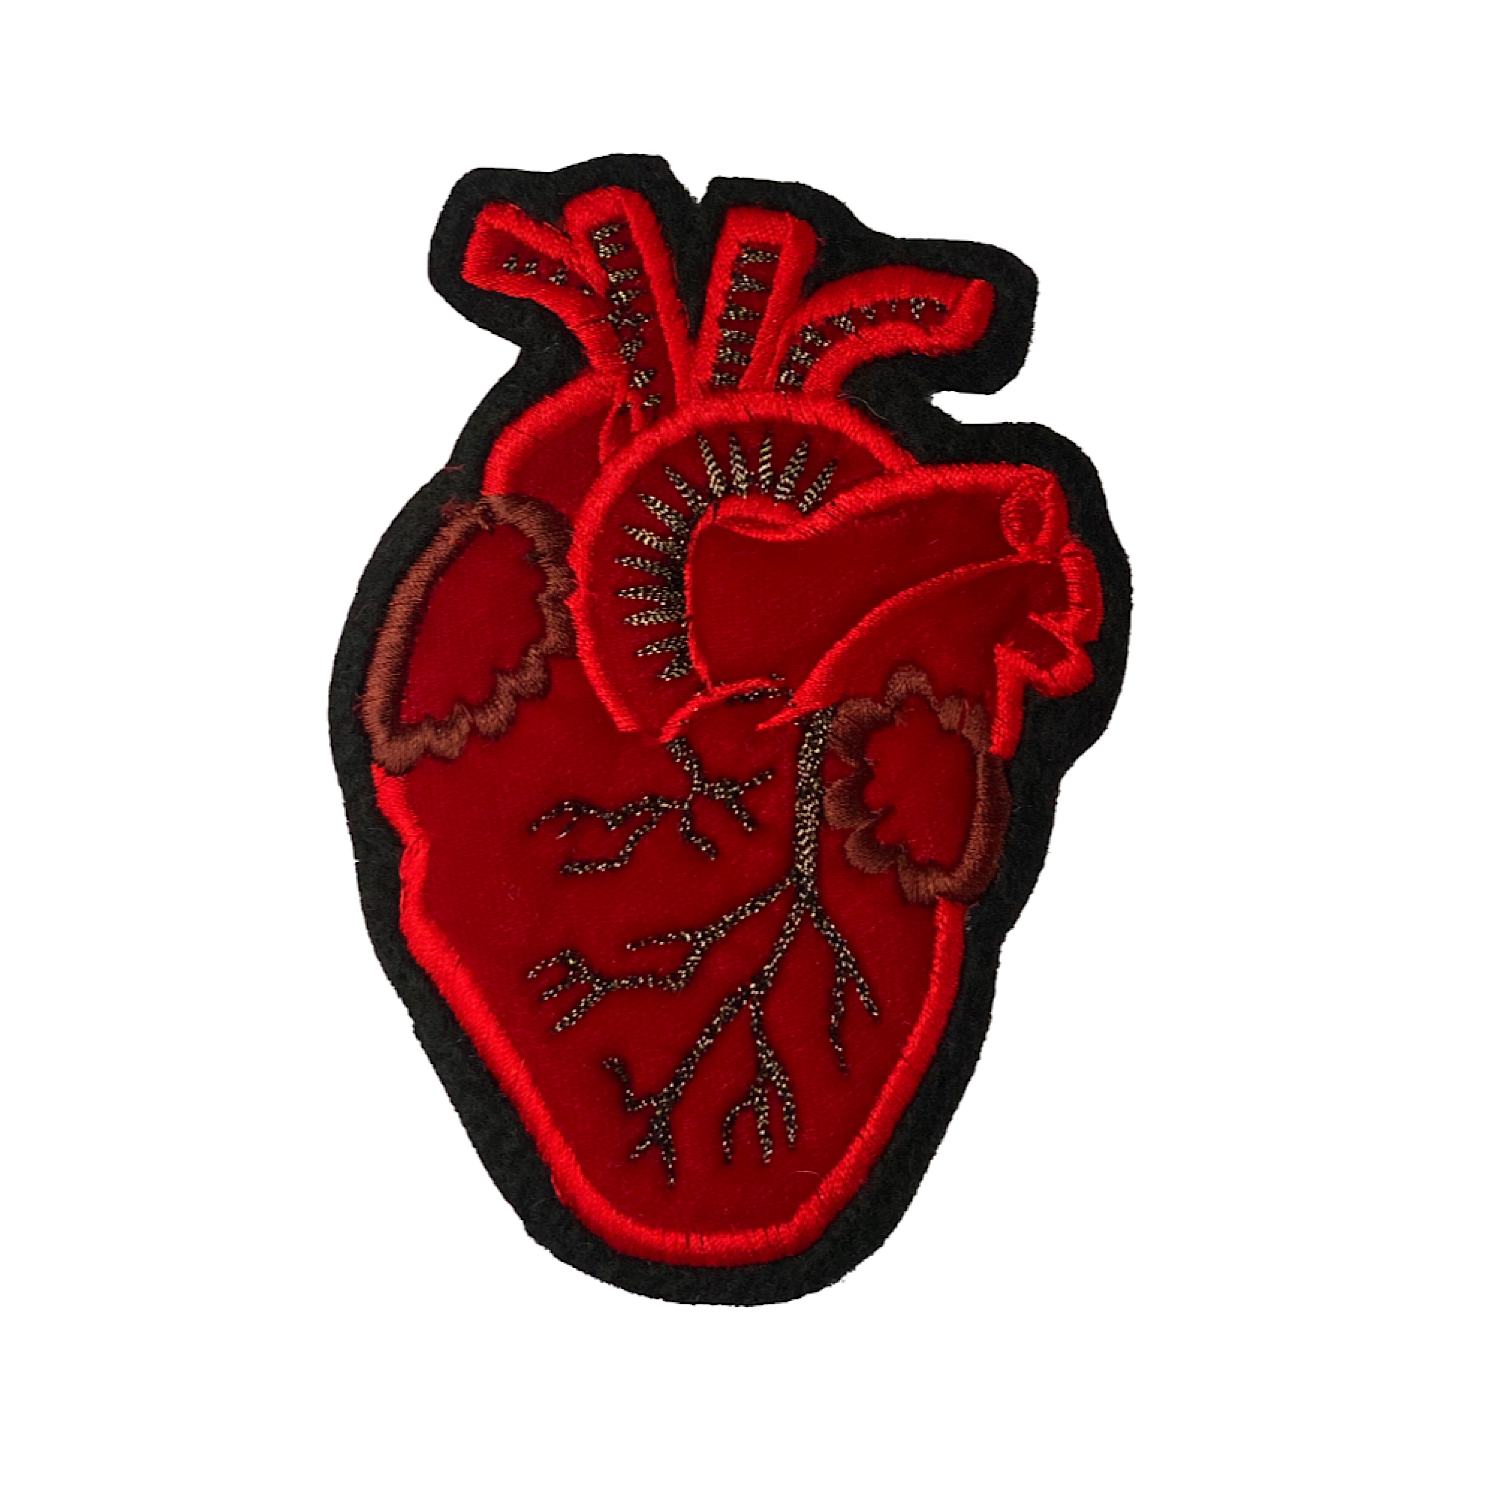 Velvet heart embroidered patch on white background